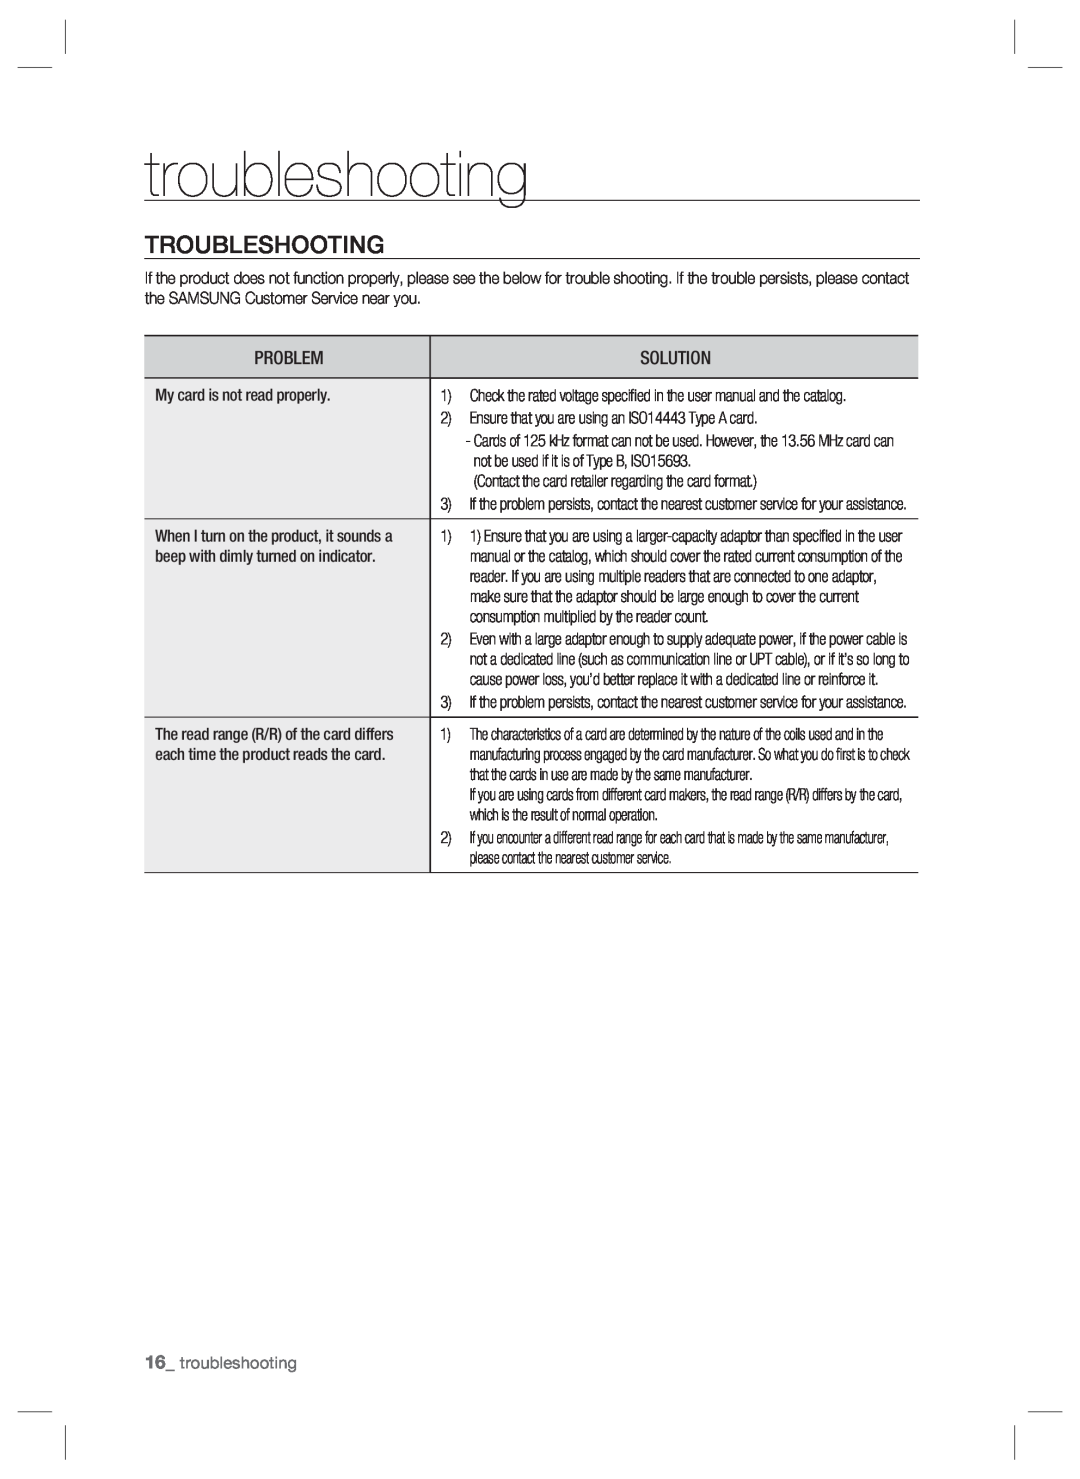 Samsung SSA-R2001 user manual troubleshooting, Troubleshooting 